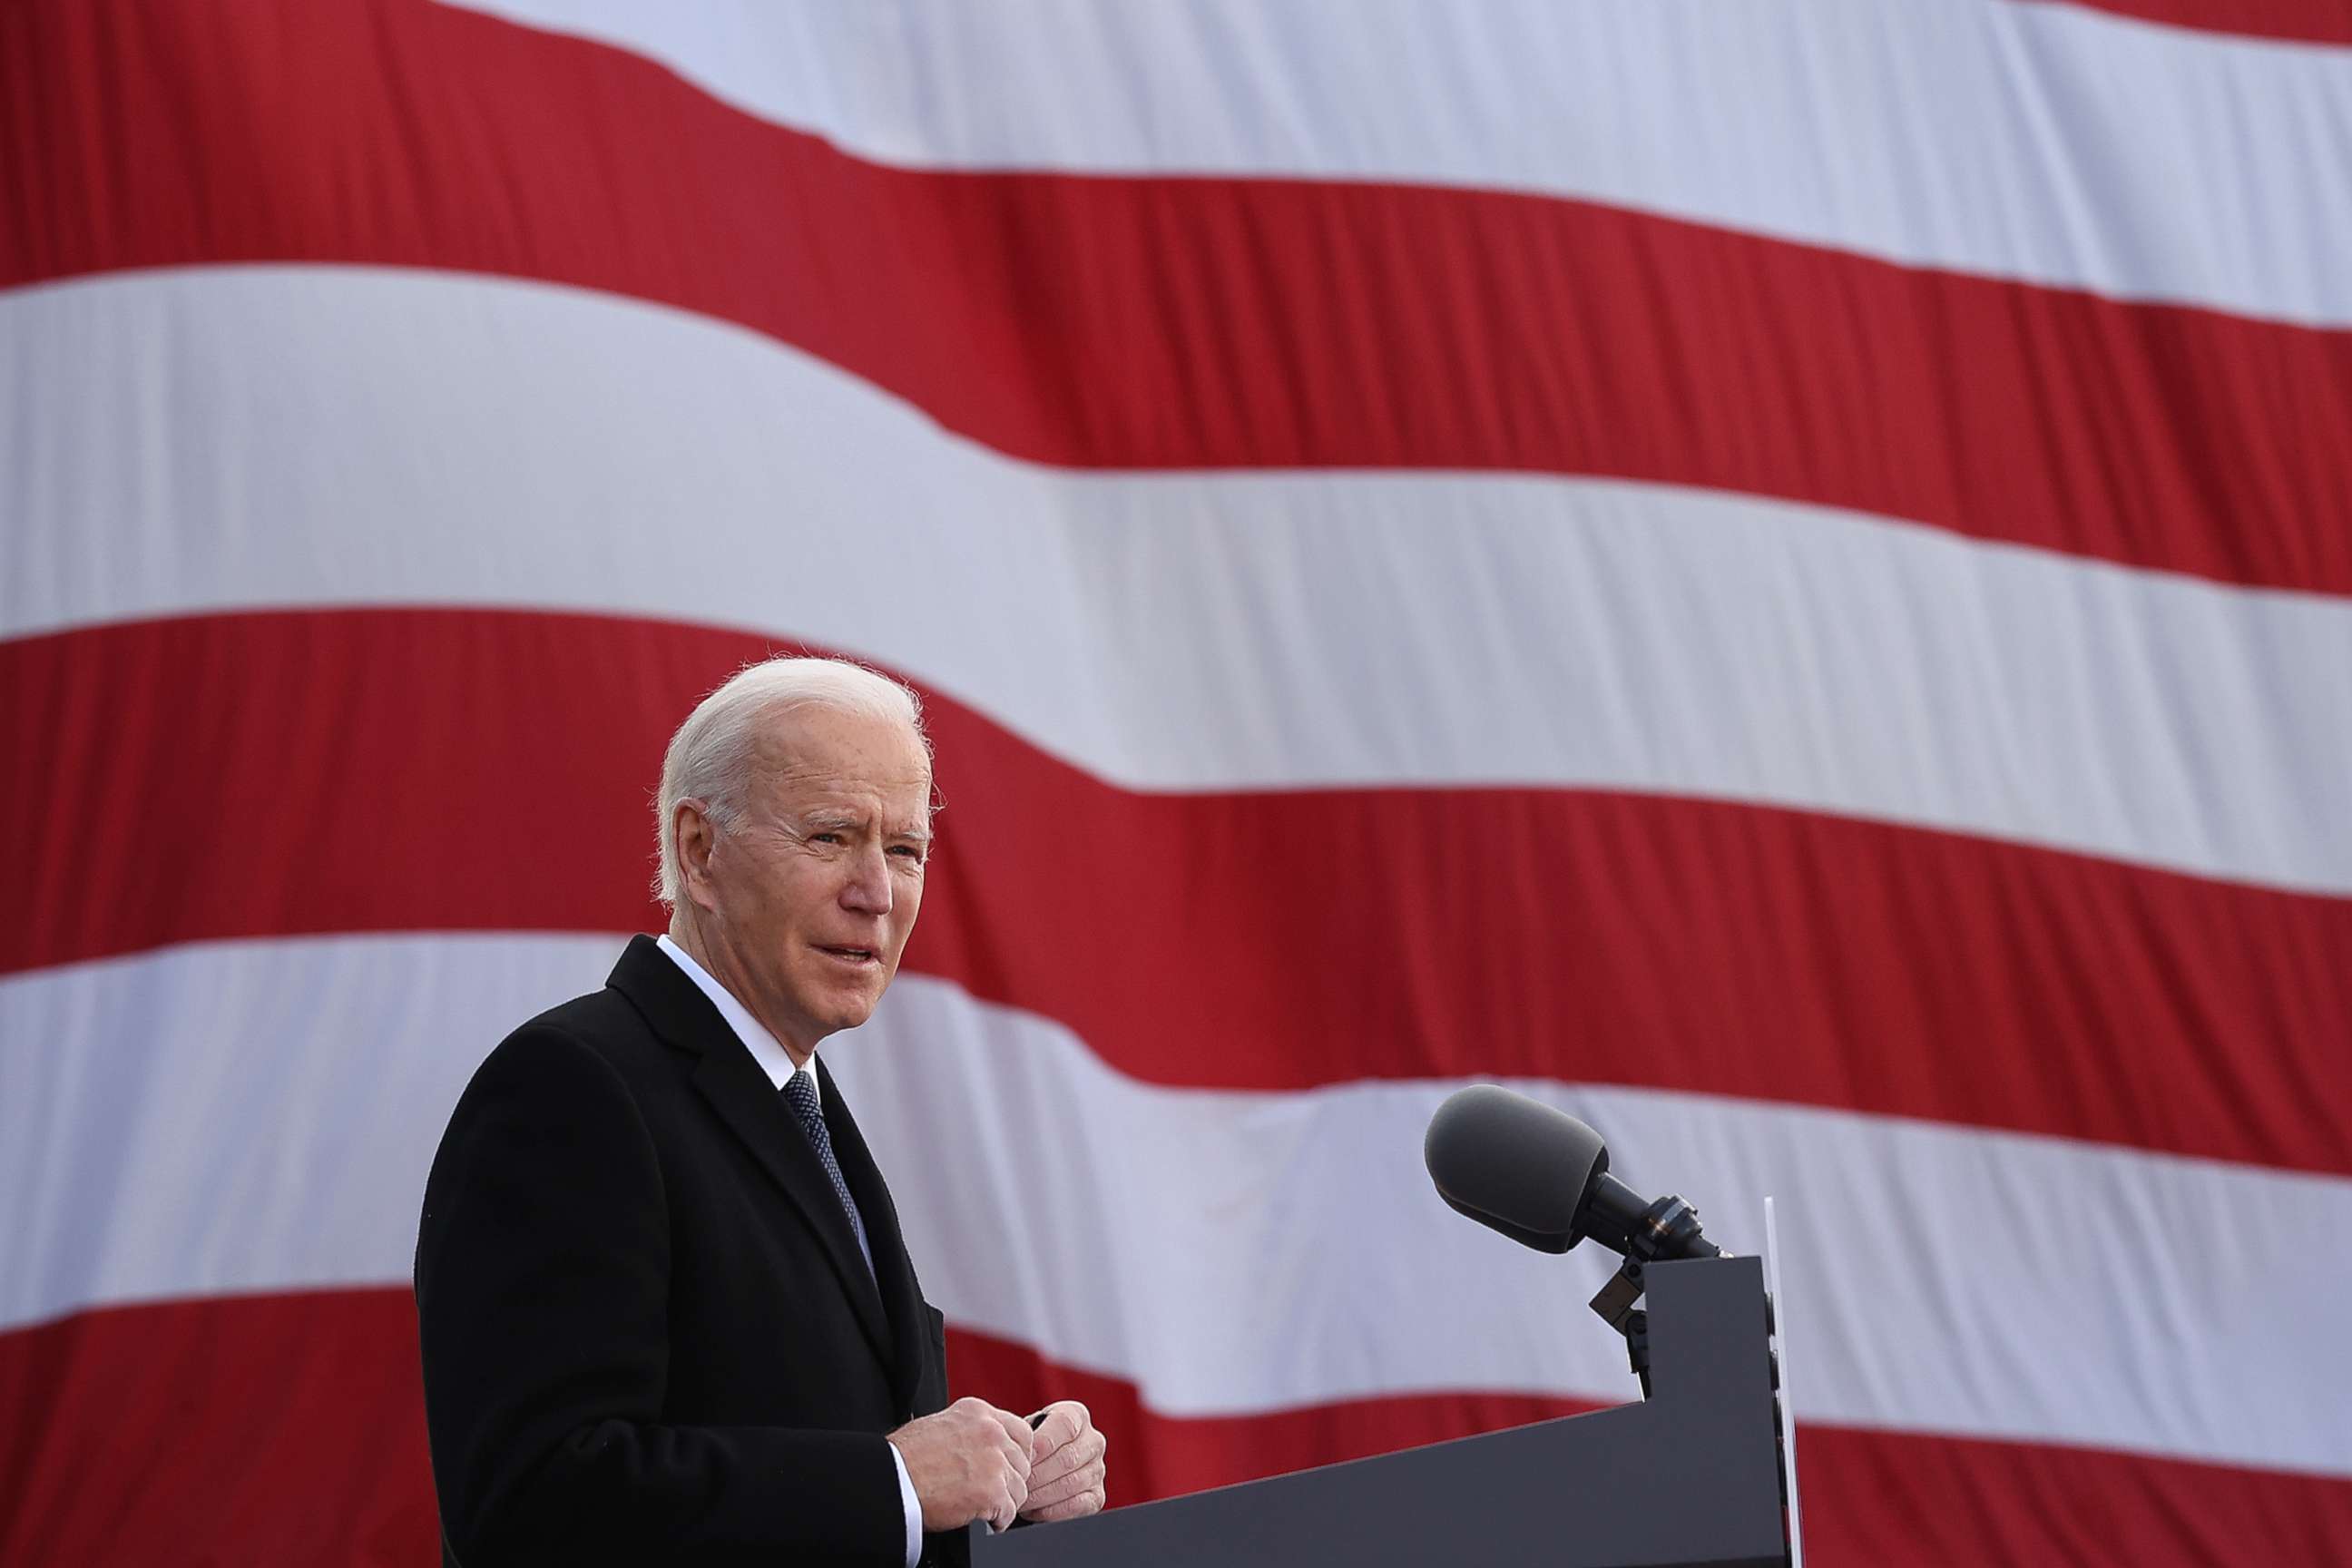 PHOTO: One day before being inaugurated as the 46th president of the United States, President-elect Joe Biden delivers remarks at the Major Joseph R. "Beau" Biden III National Guard/Reserve Center, Jan. 19, 2021, in New Castle, Del. 